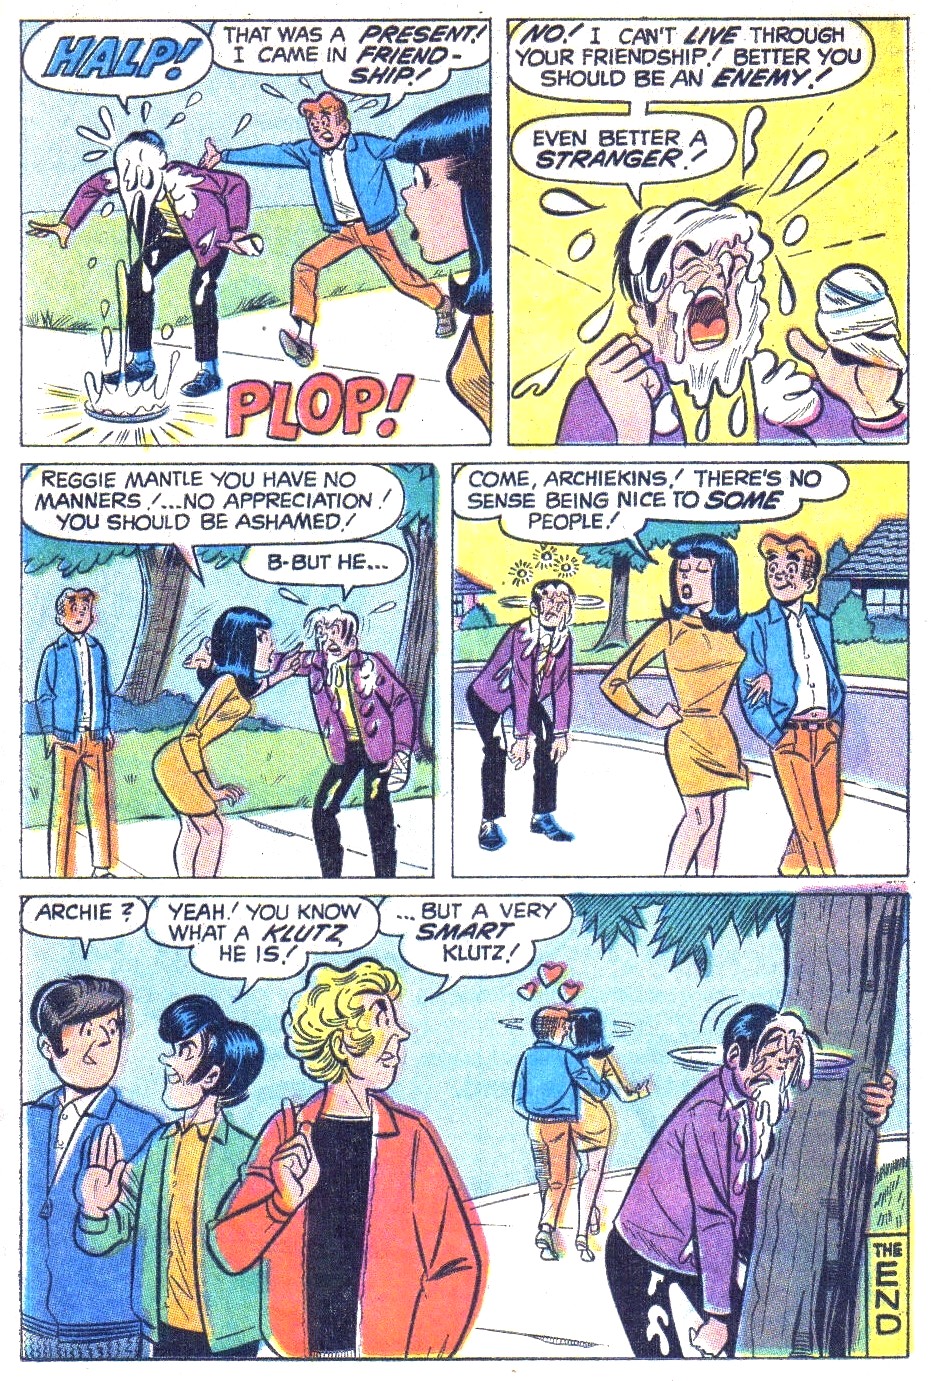 Archie (1960) 196 Page 17